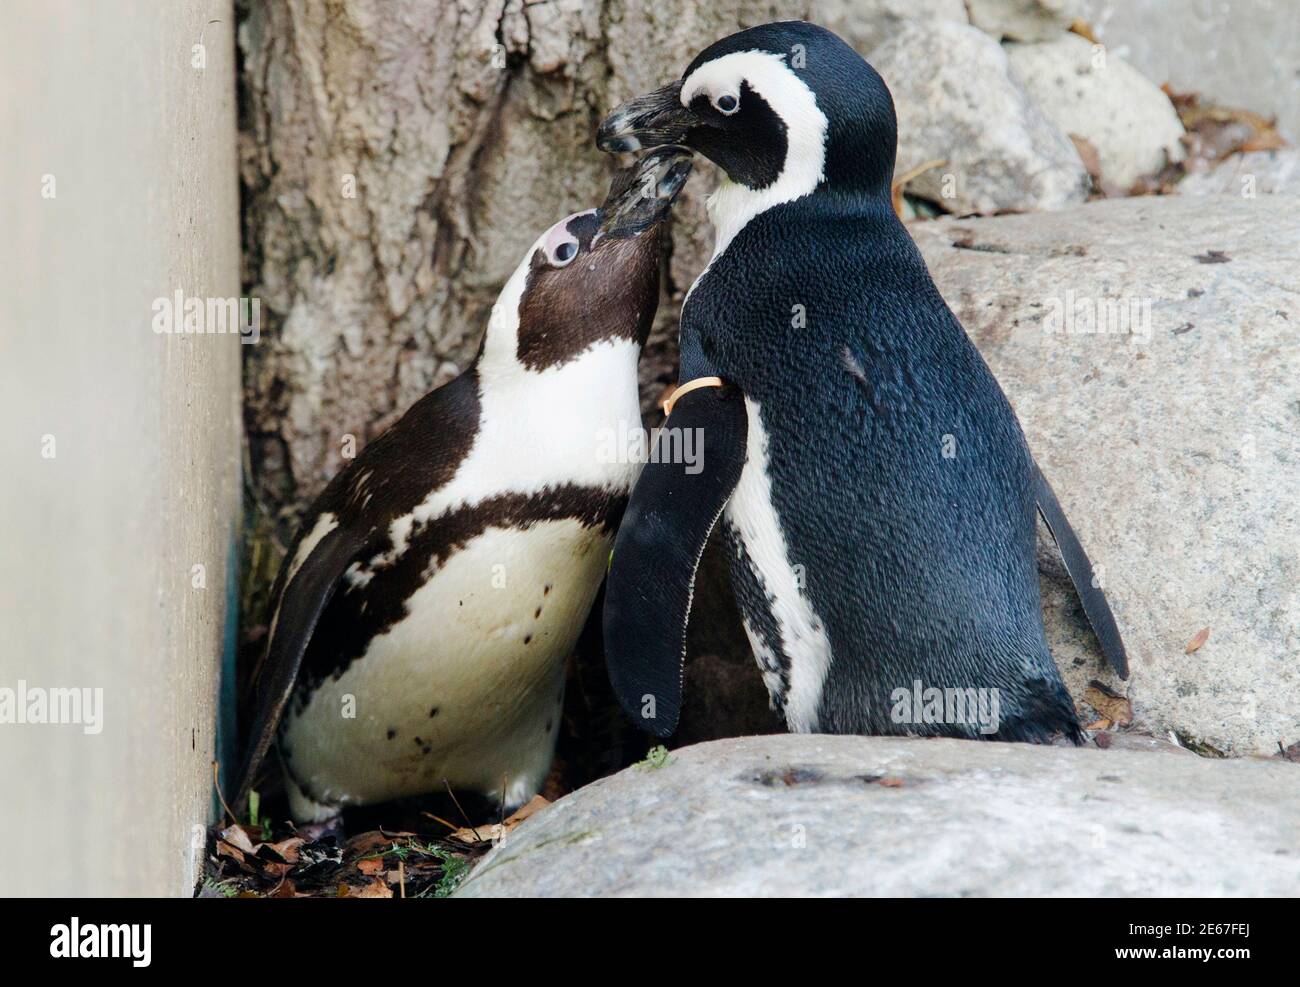 African penguins Pedro (R) and Buddy interact with each other at the  Toronto Zoo in Toronto November 8, 2011. The Toronto Zoo announced they  will separate the penguins after zookeepers noticed behaviour